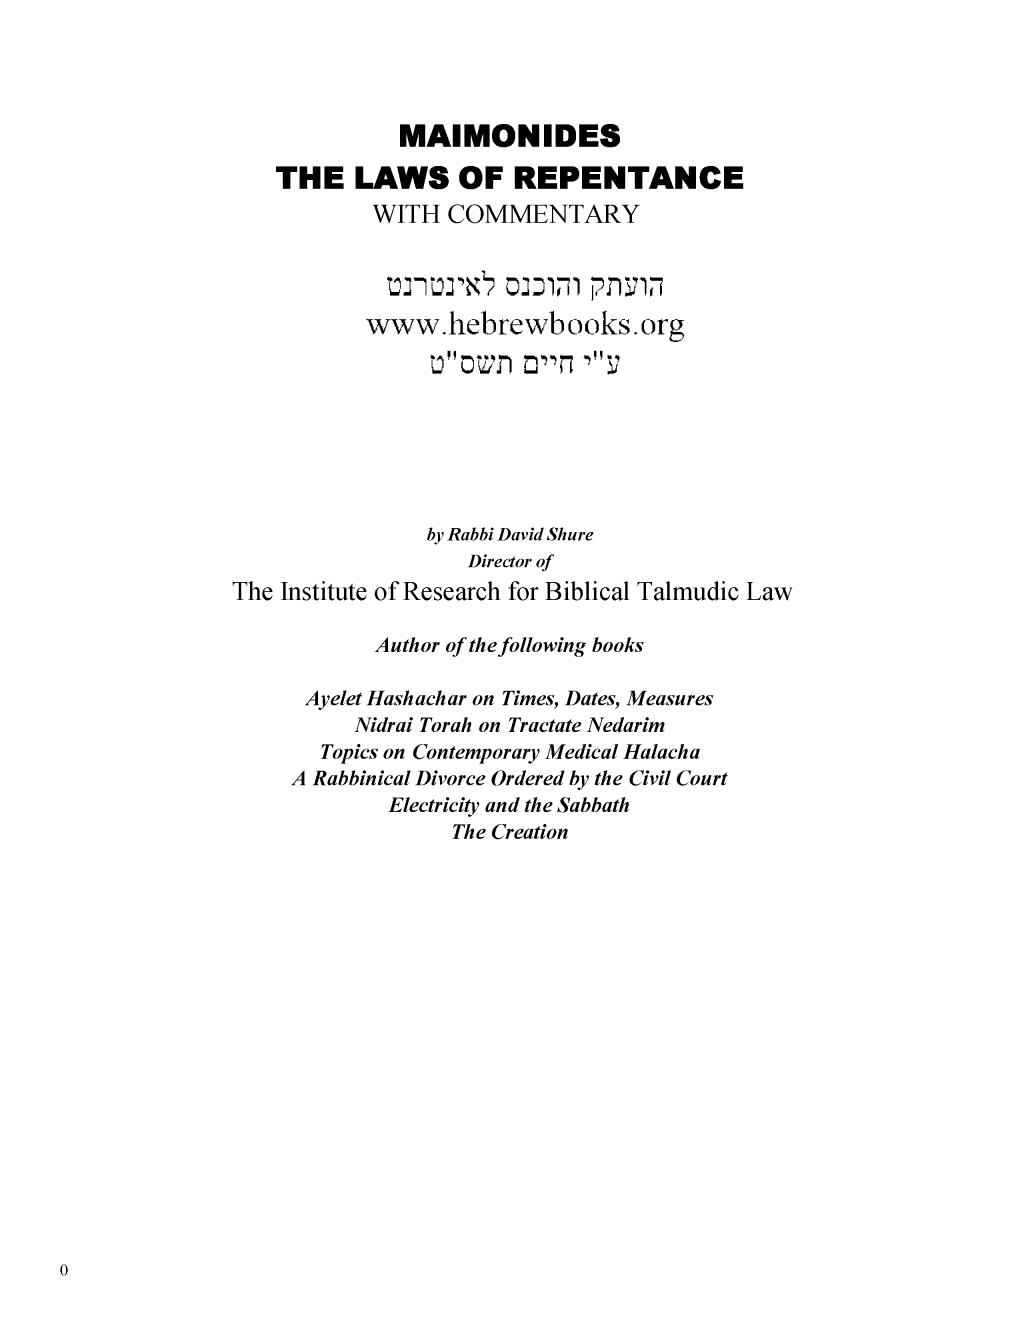 Maimonides the Laws of Repentance with Commentary